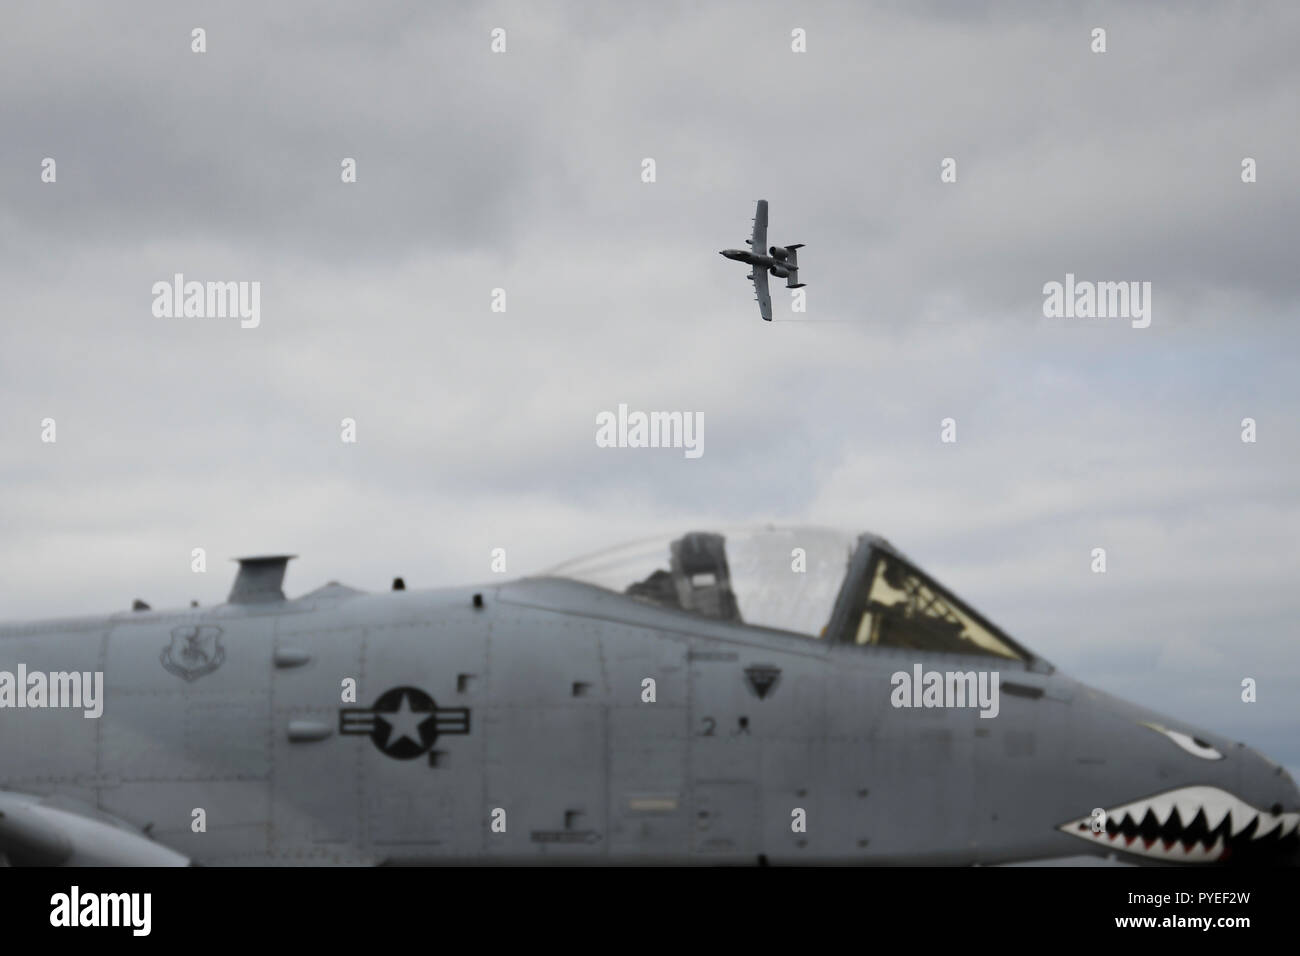 The A-10C Thunderbolt II Demonstration Team participates in an aerial demonstration at Hurlburt Field, Florida, Oct. 26, 2018. During the event, 12 aircraft from across the Air Force participated in an aerial demonstration in honor of Master Sgt. John Chapman, a combat controller who made the ultimate sacrifice during an intense battle in the mountains of Afghanistan. Chapman was posthumously awarded the Medal of Honor on Aug. 22, 2018. (U.S. Air Force photo by Senior Airman Dennis Spain) Stock Photo